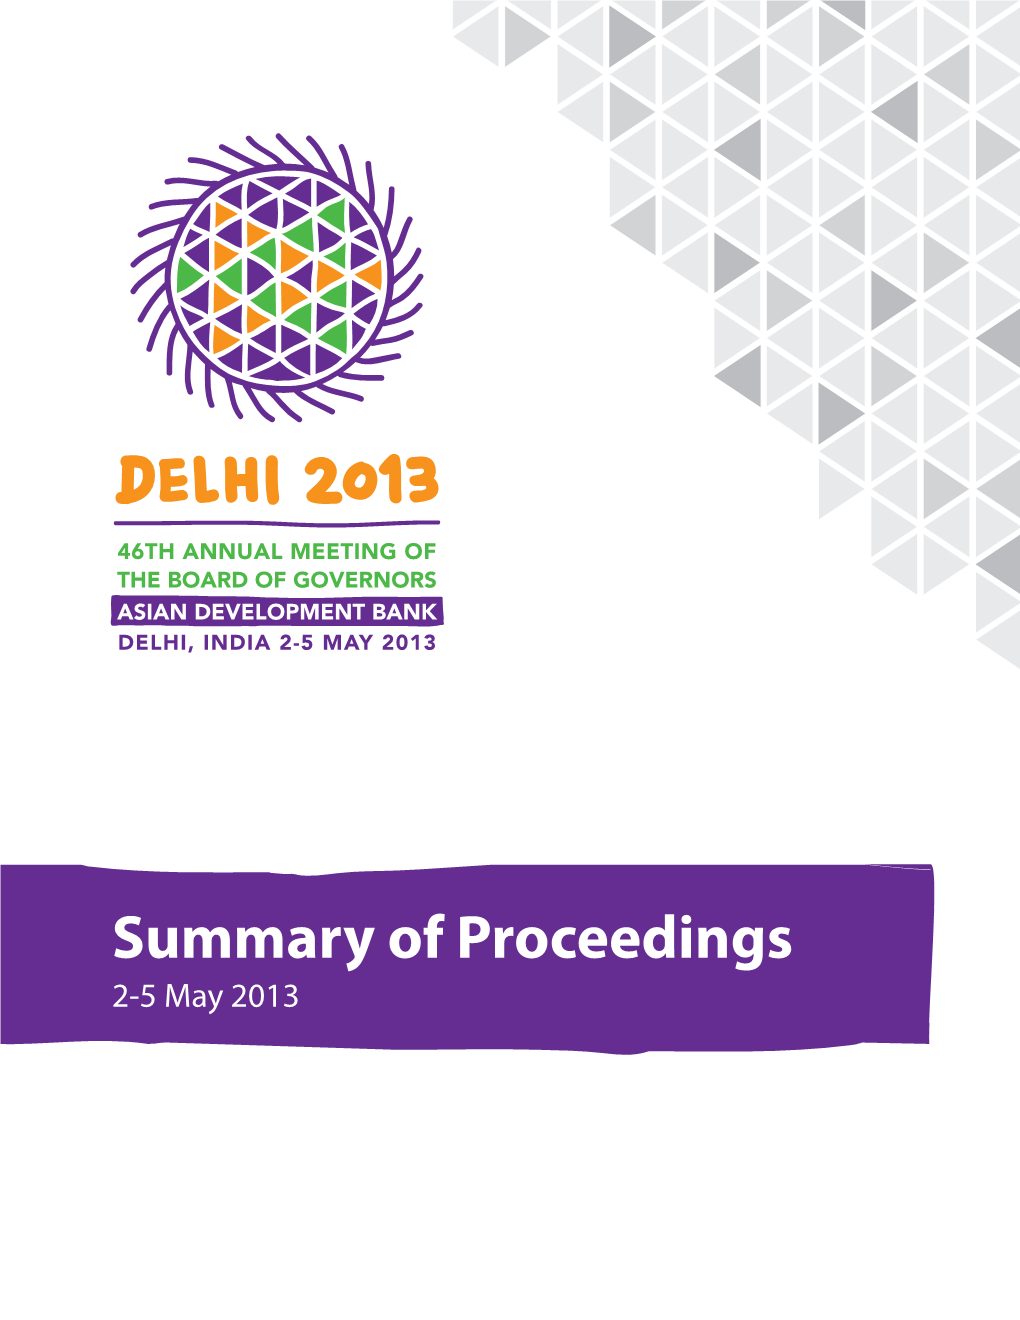 Summary of Proceedings of the 46Th Annual